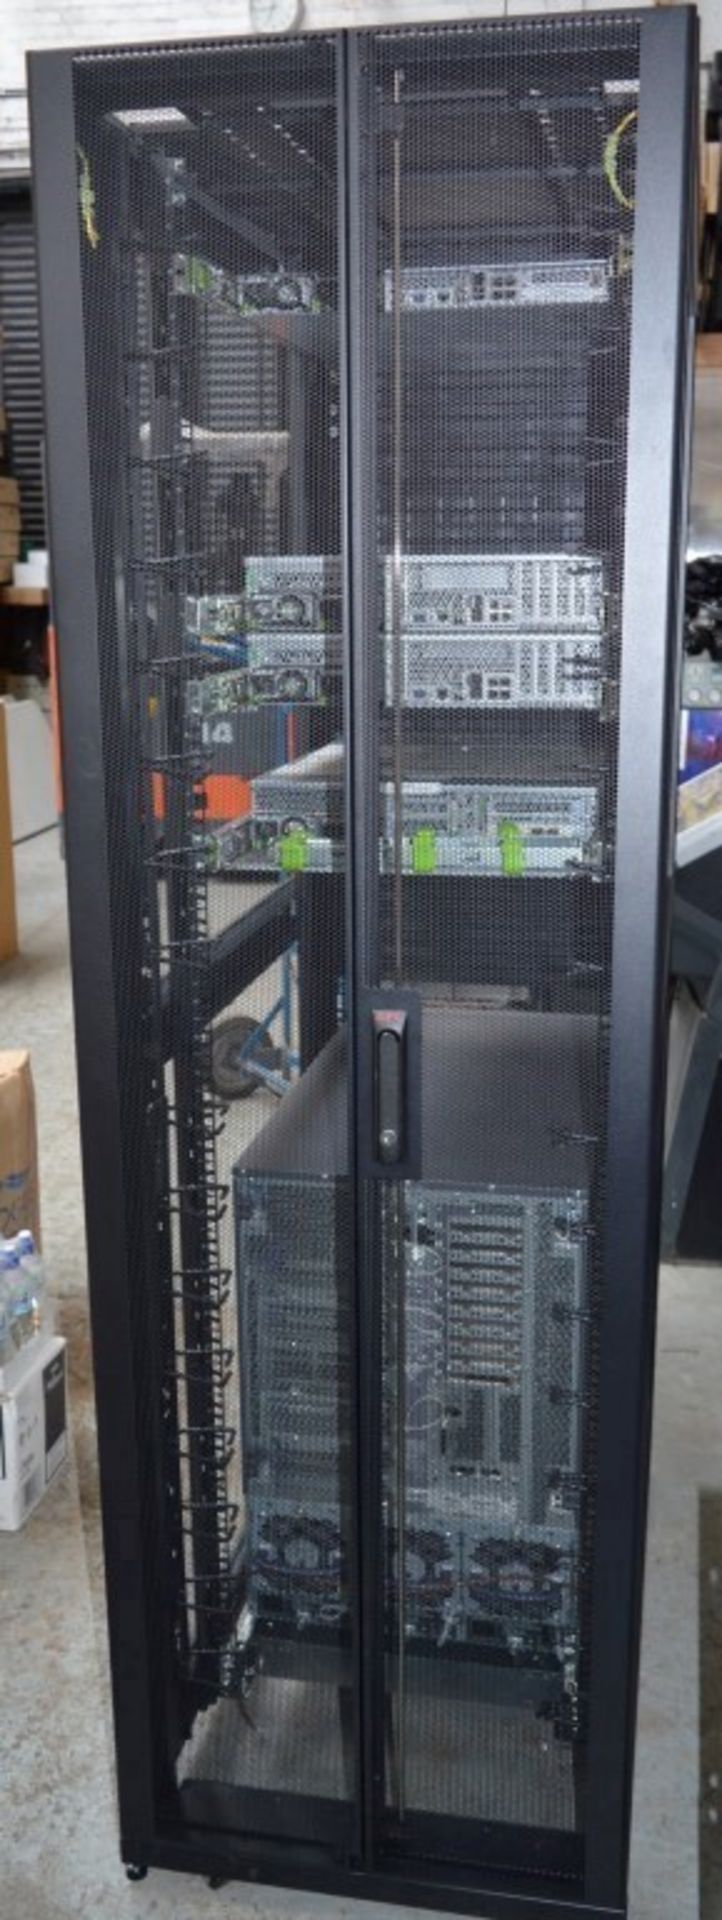 1 x APC Netshelter Server Rack With Sunfire Server Systems Including X4100 (8gb Two CPU), X4200 (8gb - Image 10 of 18